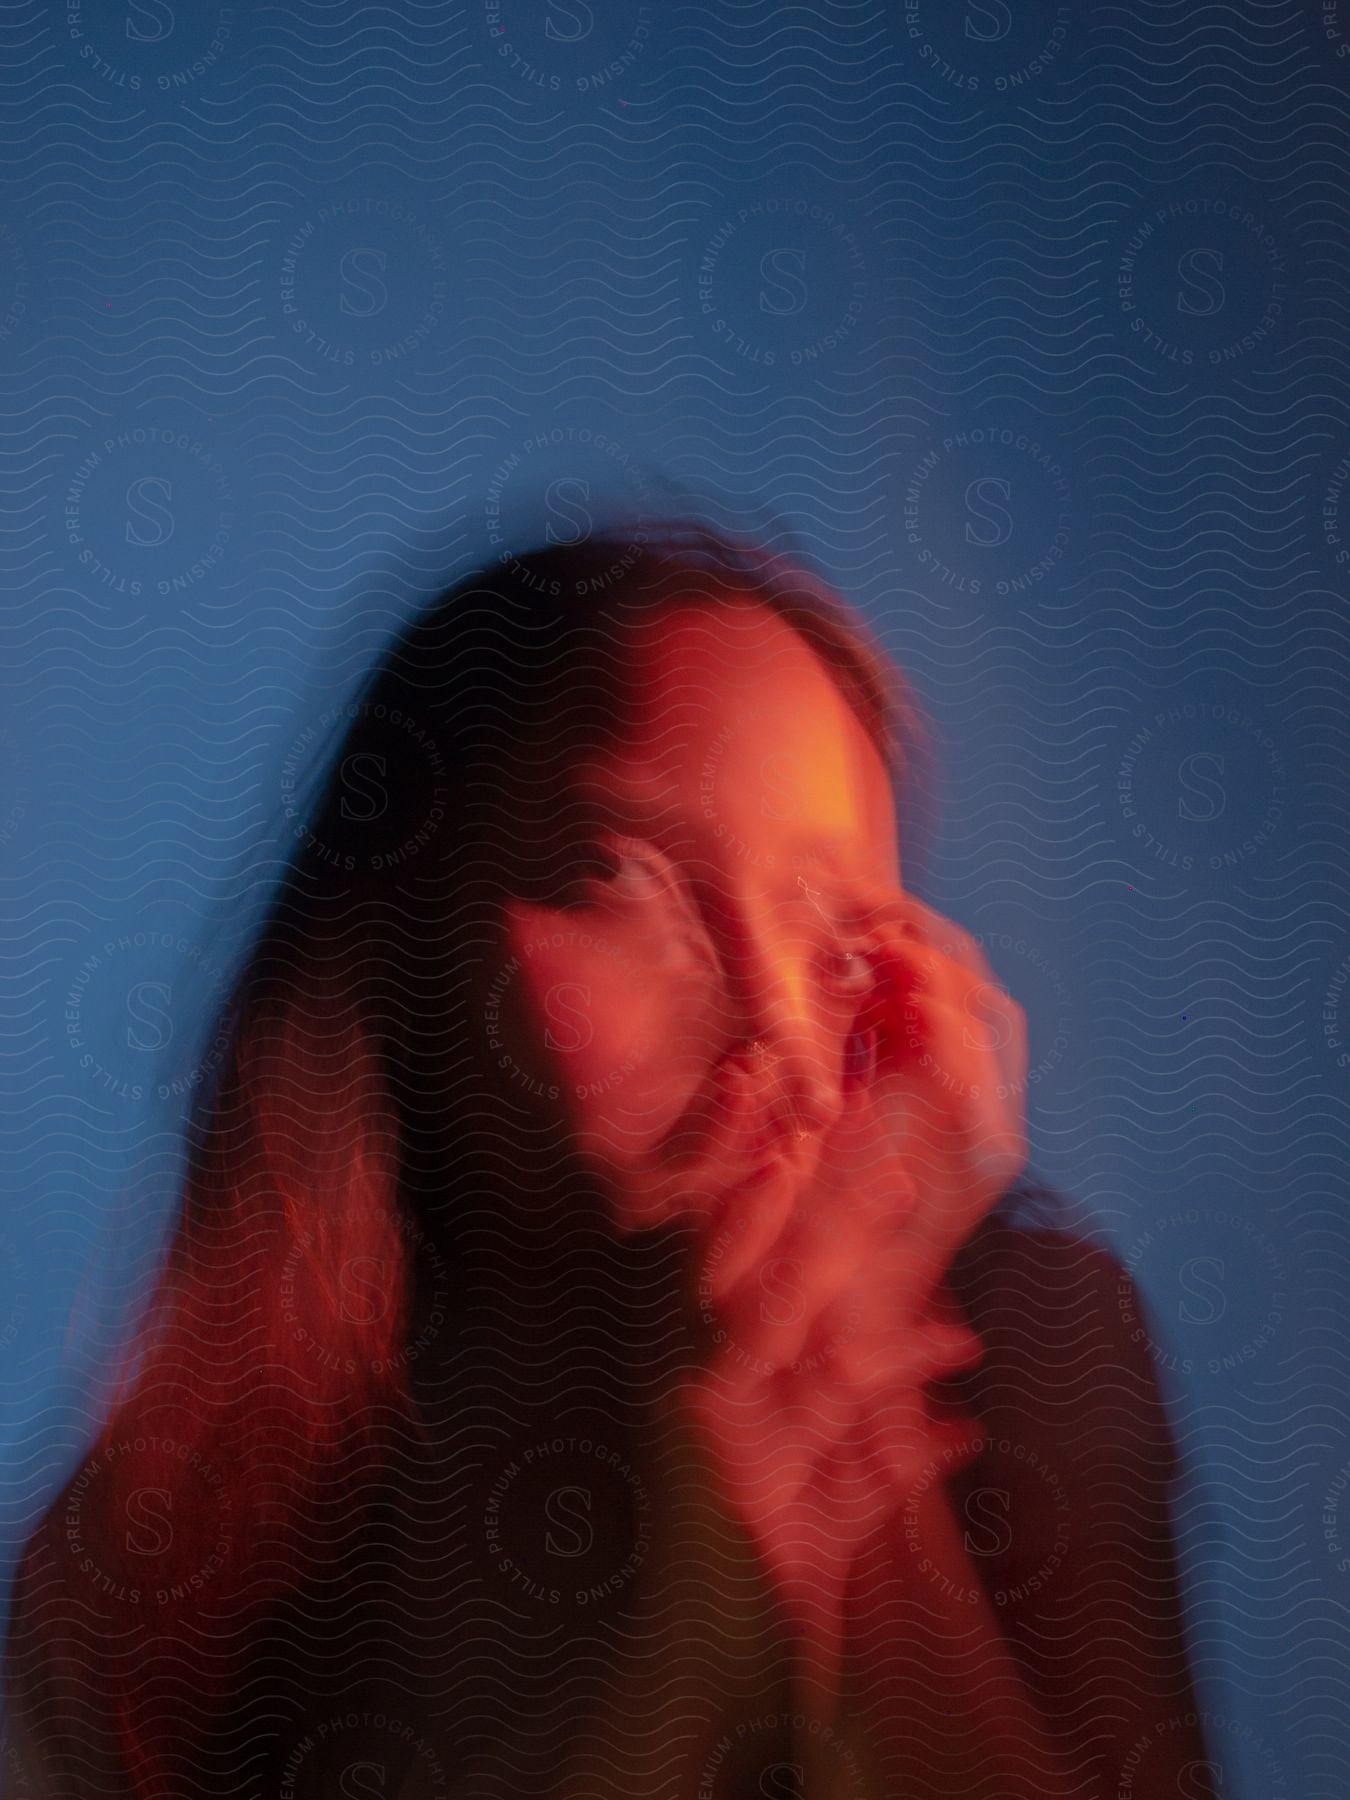 A blurry profile of a woman with her hand on her face looking forward